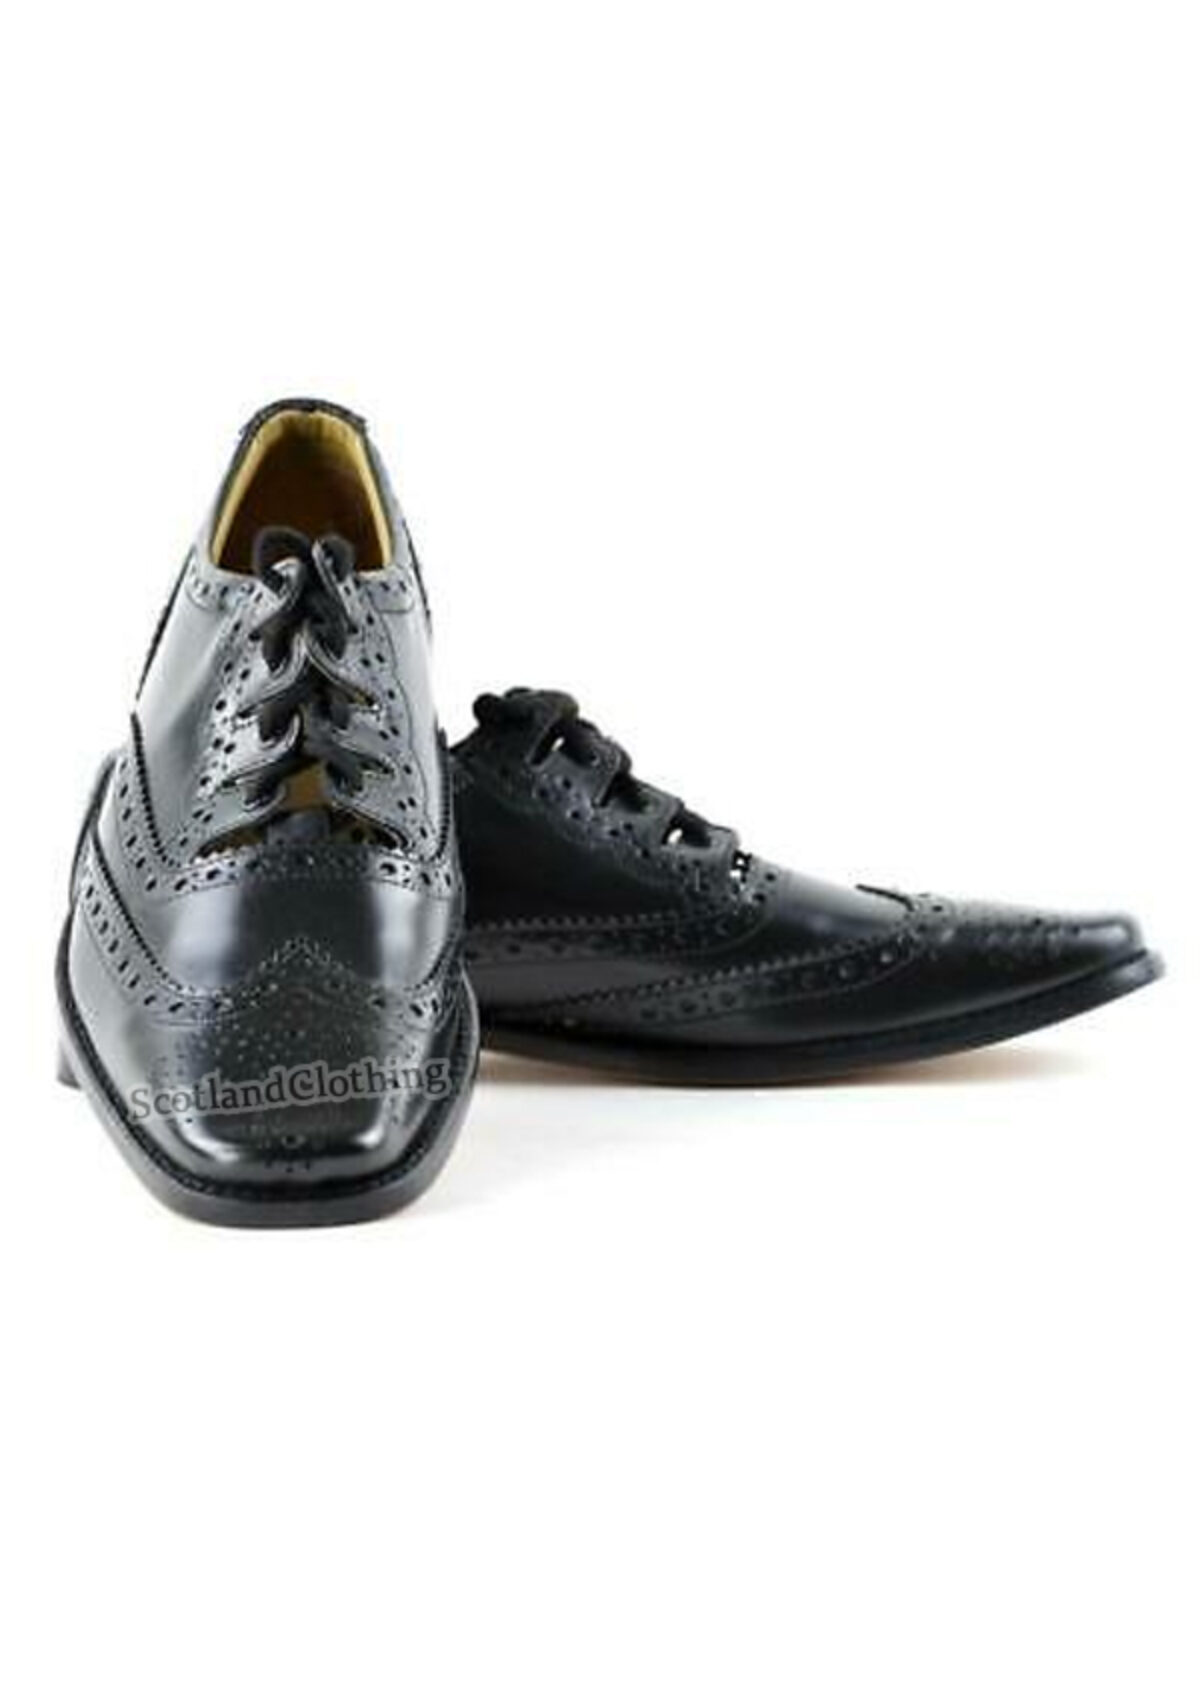 GHILLIE BROGUE THISTLE SHOES BLACK LEATHER SOLE PREMIUM QUALITY MADE IN SCOTLAND 